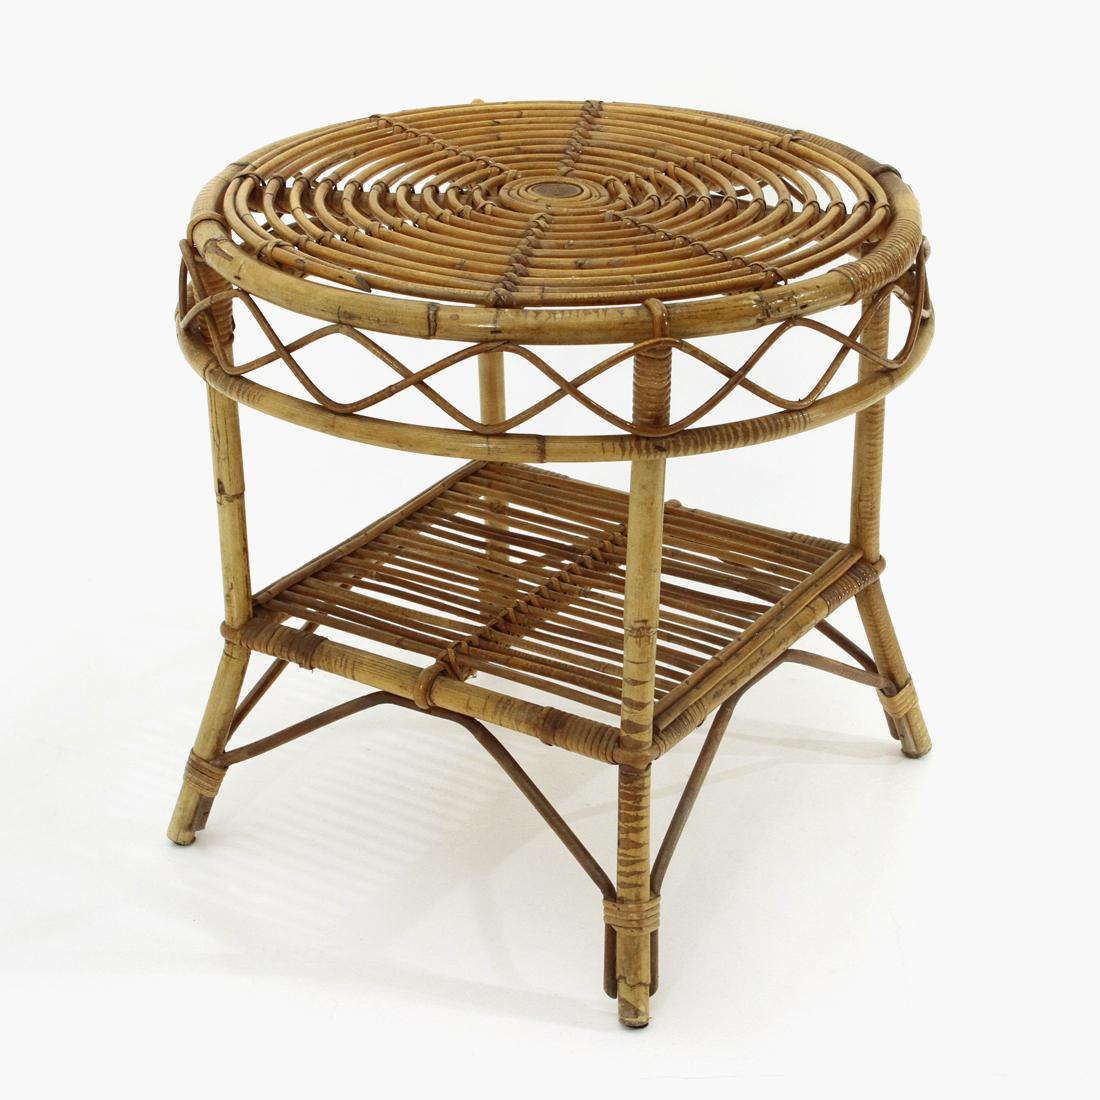 Italian-made coffee table produced in the 1950s.
Rattan structure.
Round top with decorated edge.
Rectangular lower shelf
Good general condition, some signs due to normal use over time.

Dimensions: Diameter 60 cm, height 57 cm.